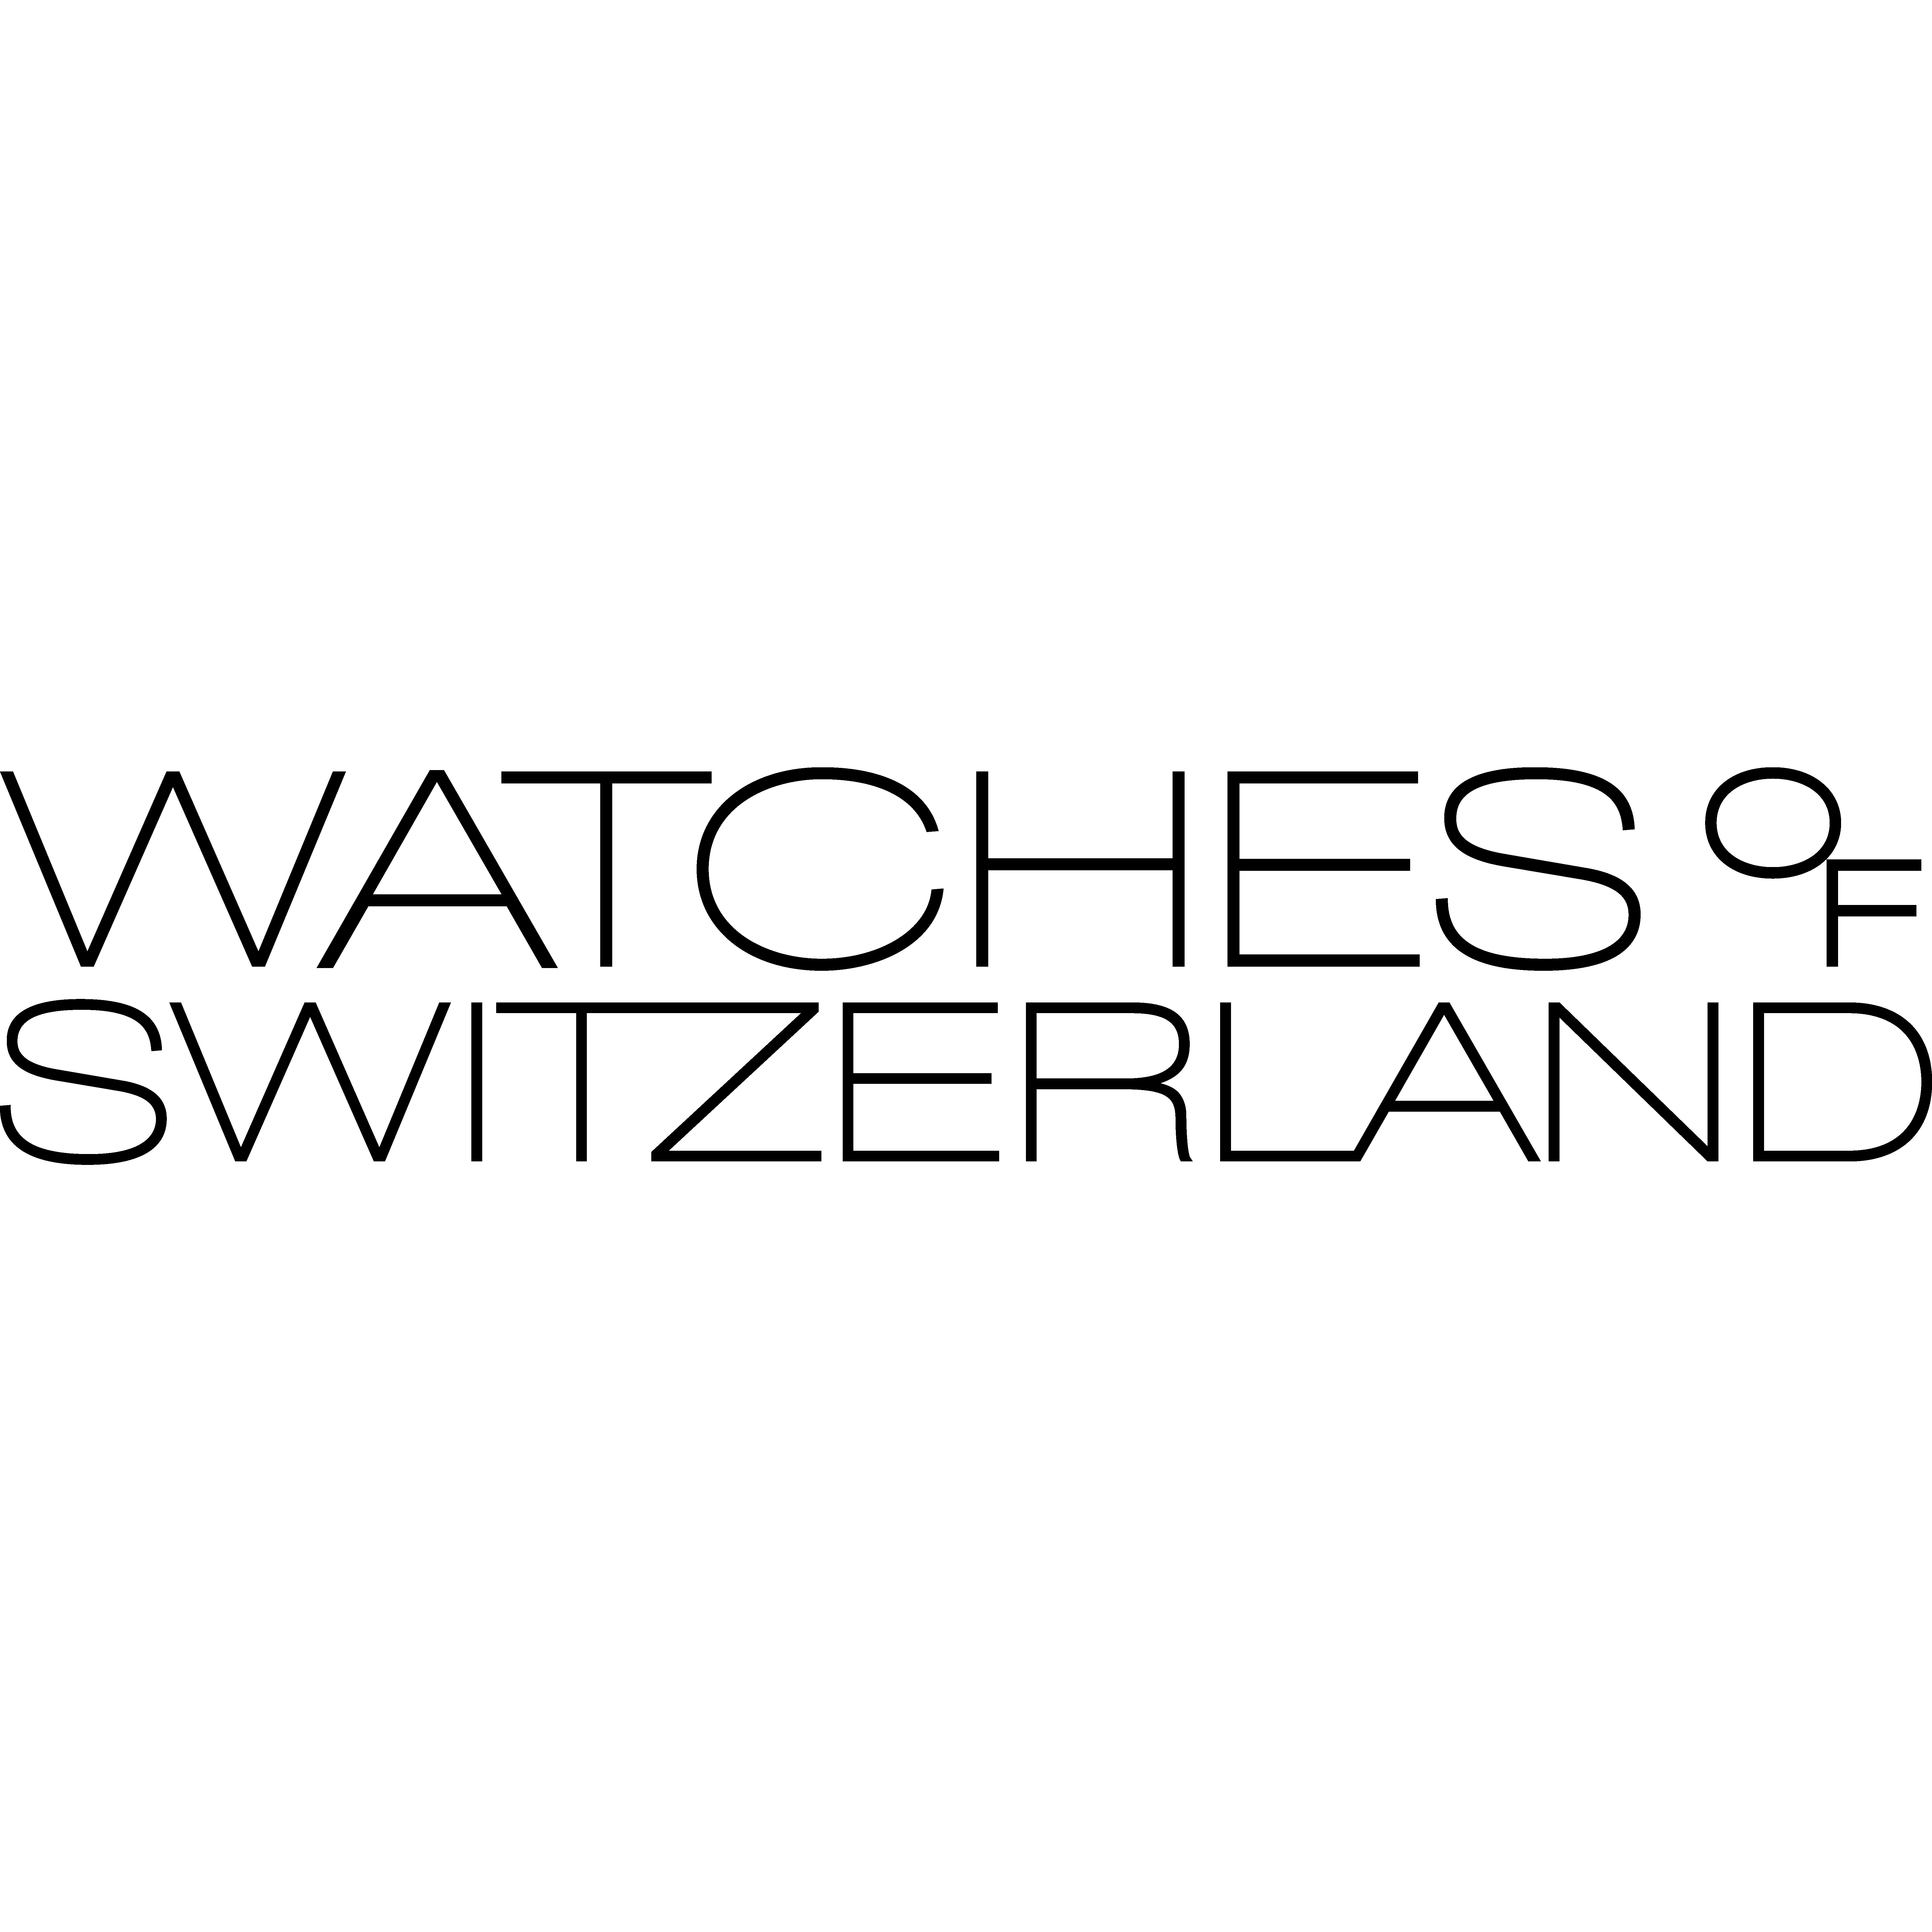 Watches of Switzerland - Cardiff, South Glamorgan CF10 2DP - 02920 340300 | ShowMeLocal.com